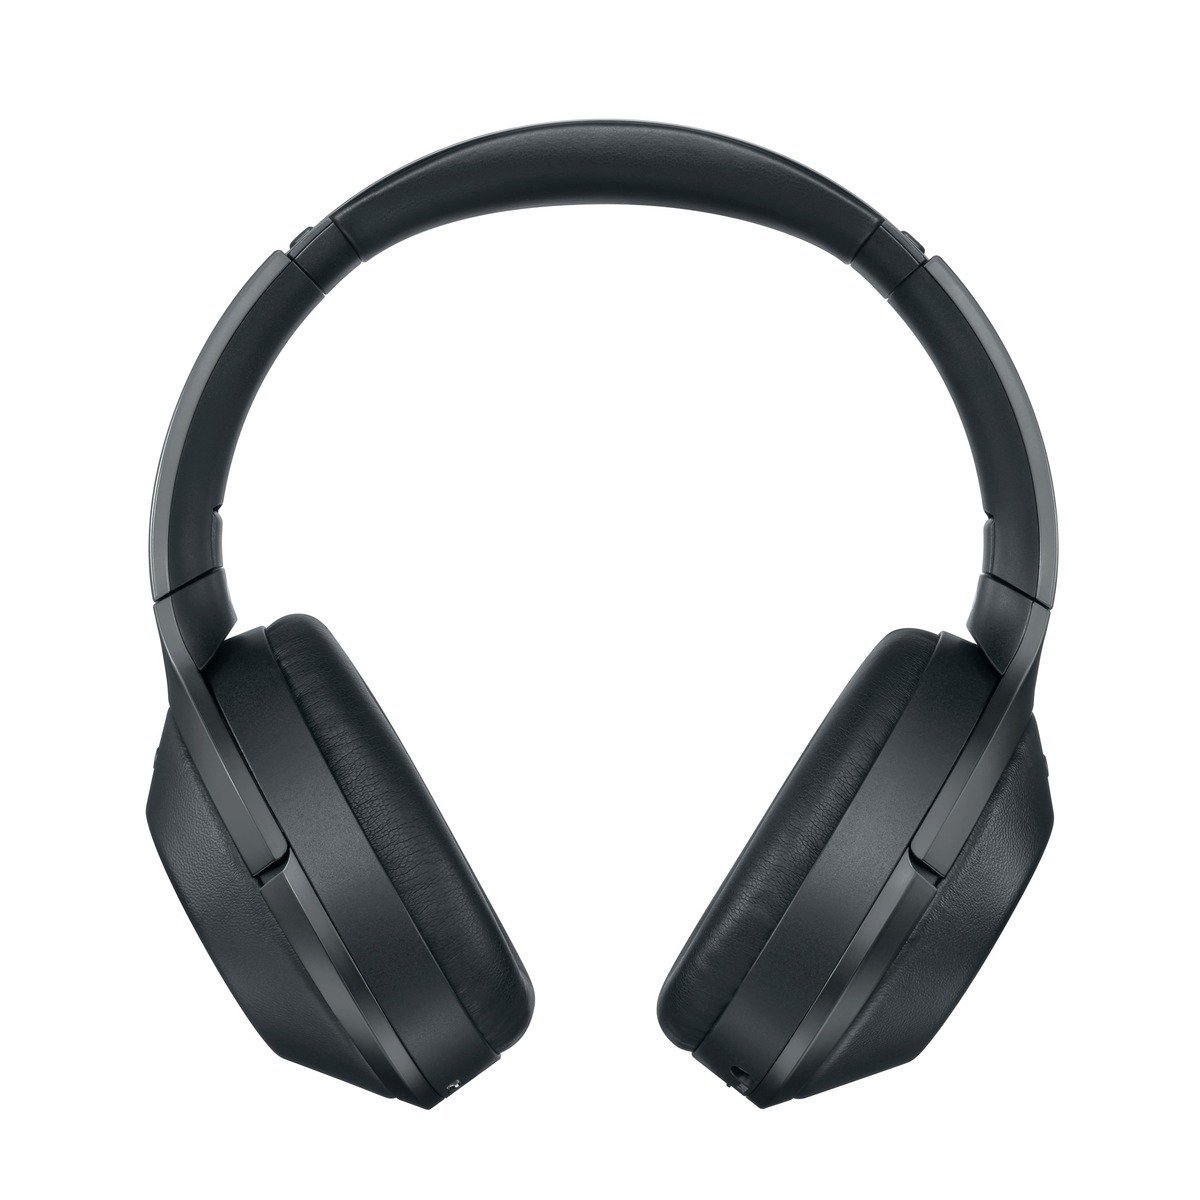 Get $72 Off Sony&#039;s Premium Noise Cancelling Bluetooth Headphones [Deal]